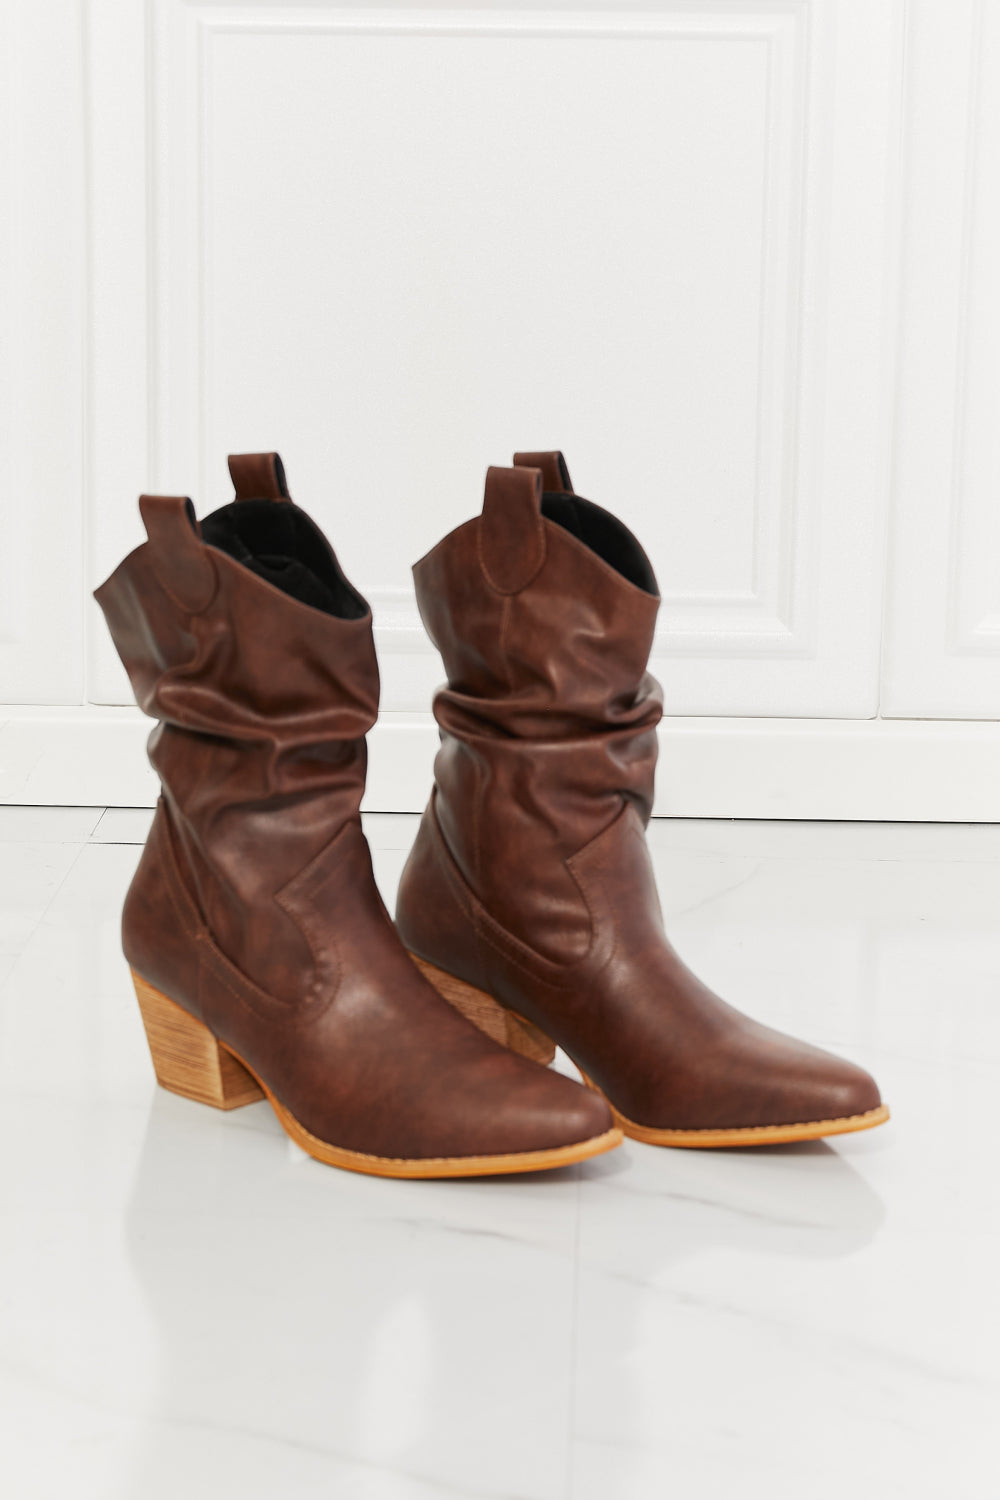 MMShoes Better in Texas Scrunch Cowboy Boots in Brown - AllIn Computer